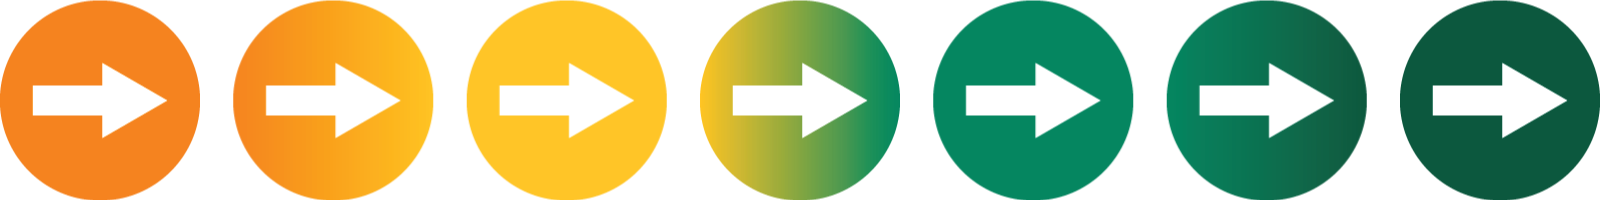 Circles with white arrows in them, pointing to the right.